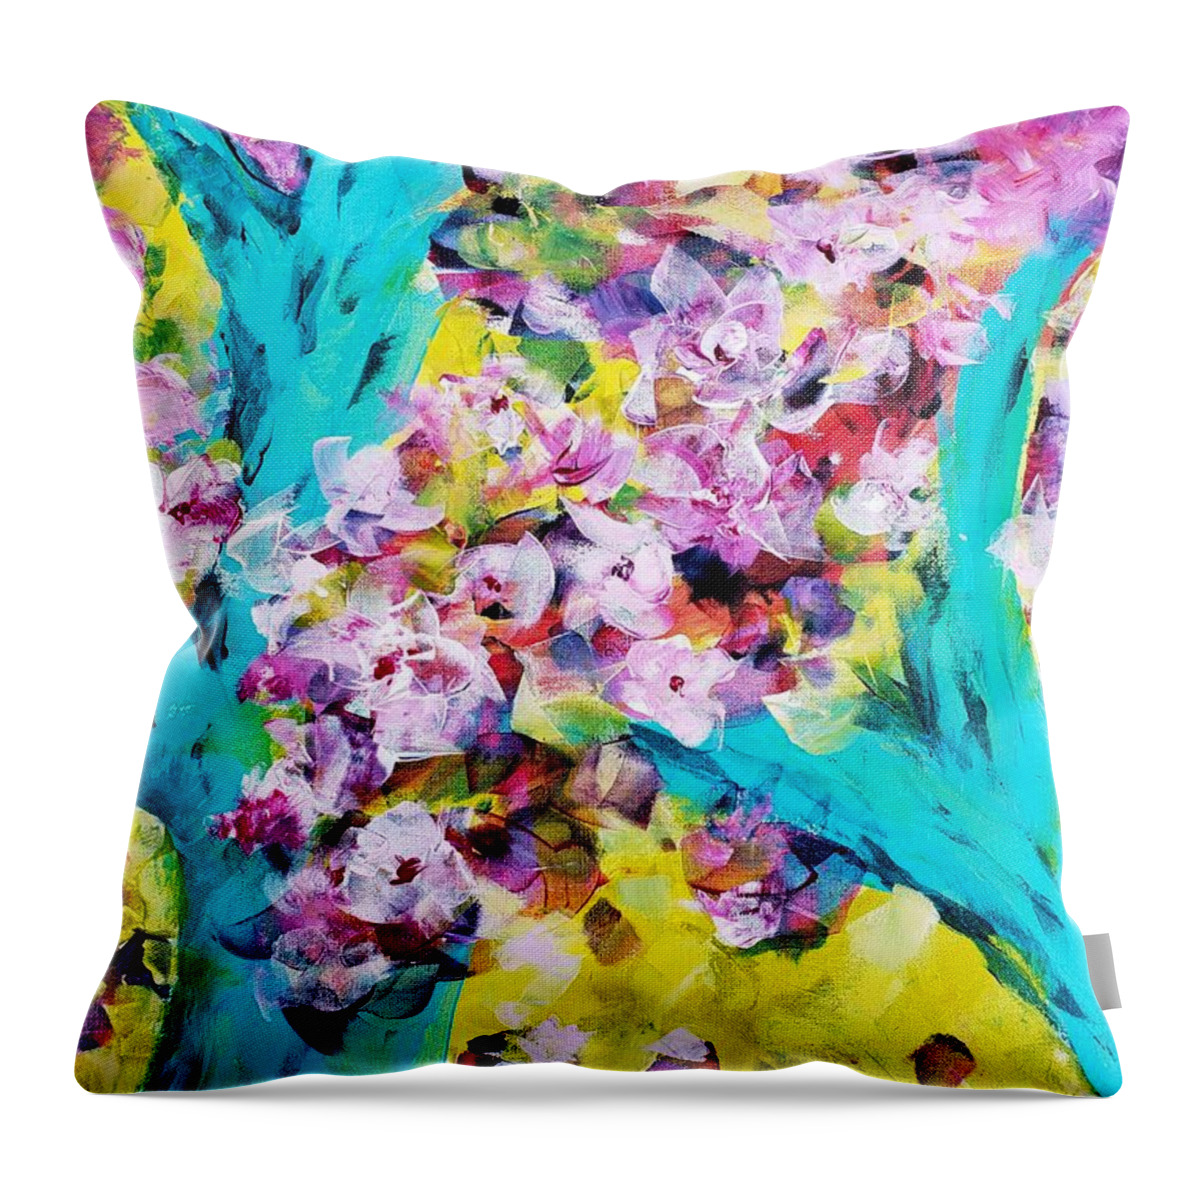 Whimsical Abstract Throw Pillow featuring the painting Spring Blossoms by Lisa Debaets